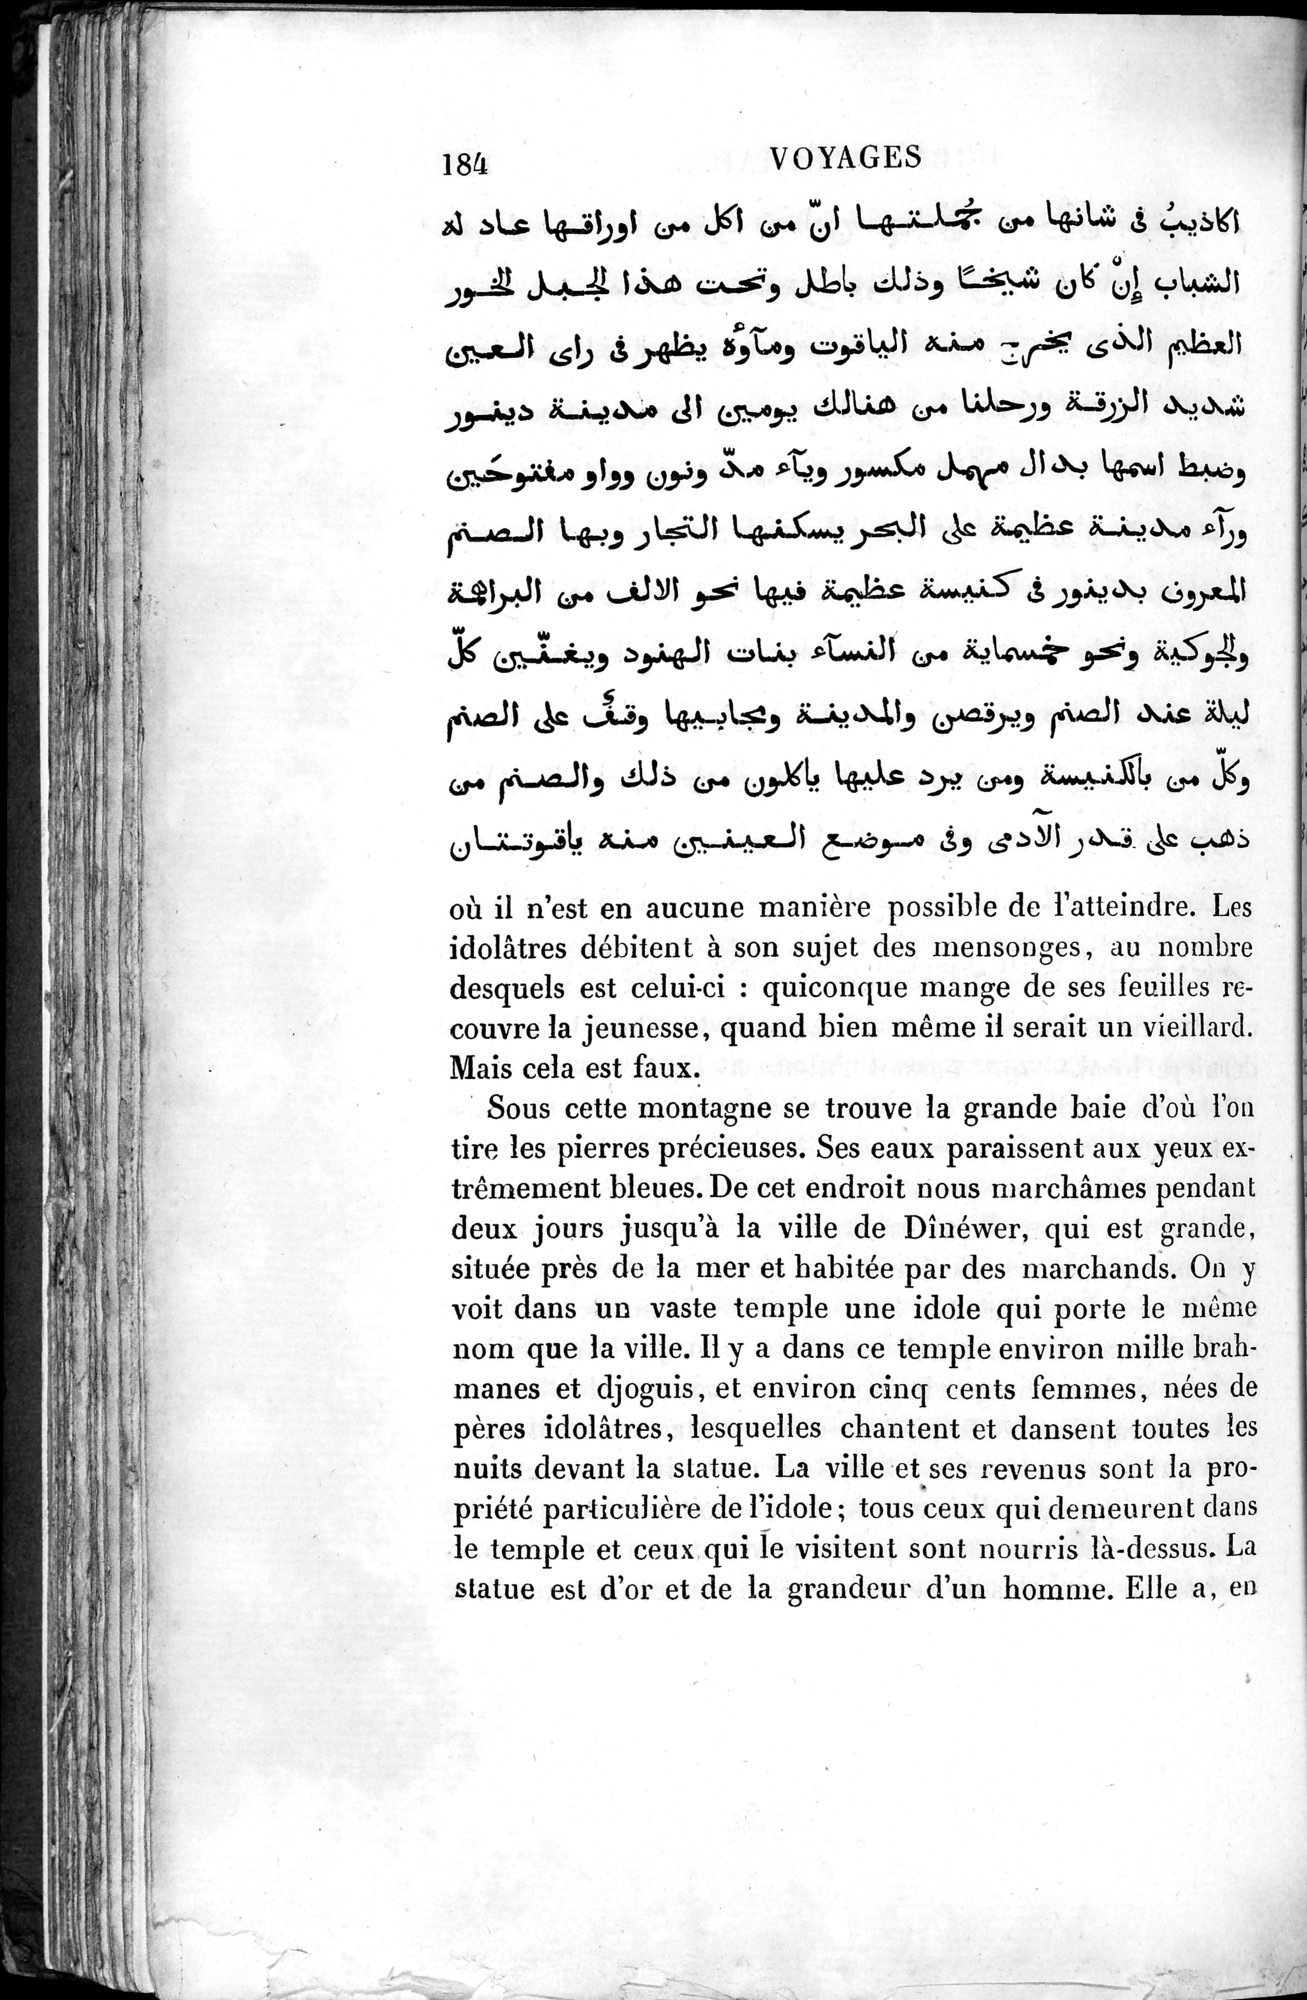 Voyages d'Ibn Batoutah : vol.4 / Page 196 (Grayscale High Resolution Image)